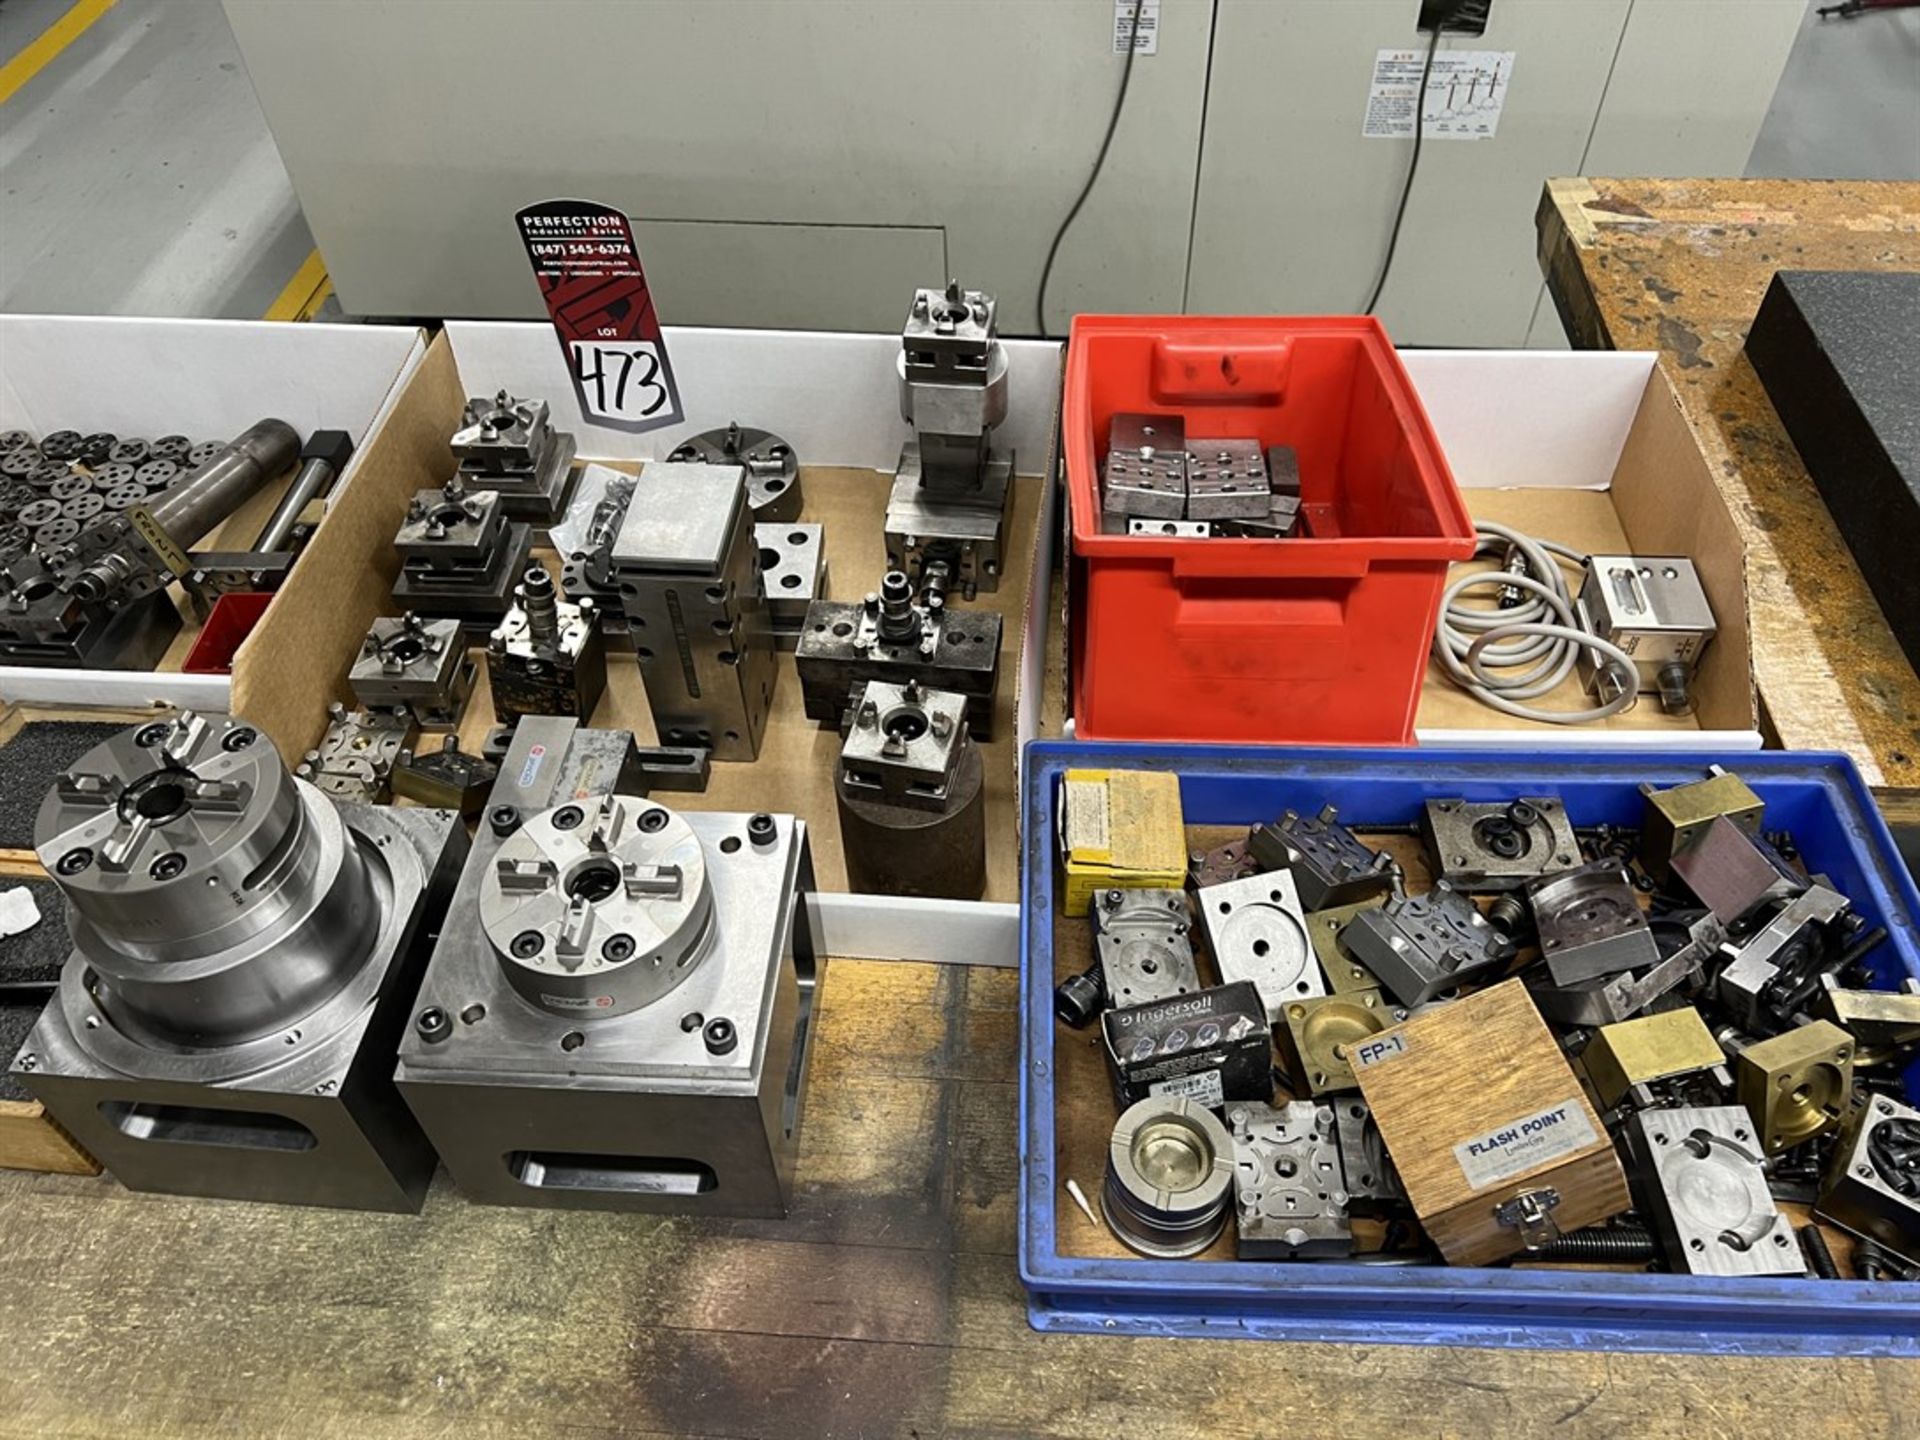 Lot of Assorted EROWA EDM Tooling, Fixtures, and Electrodes - Image 2 of 4